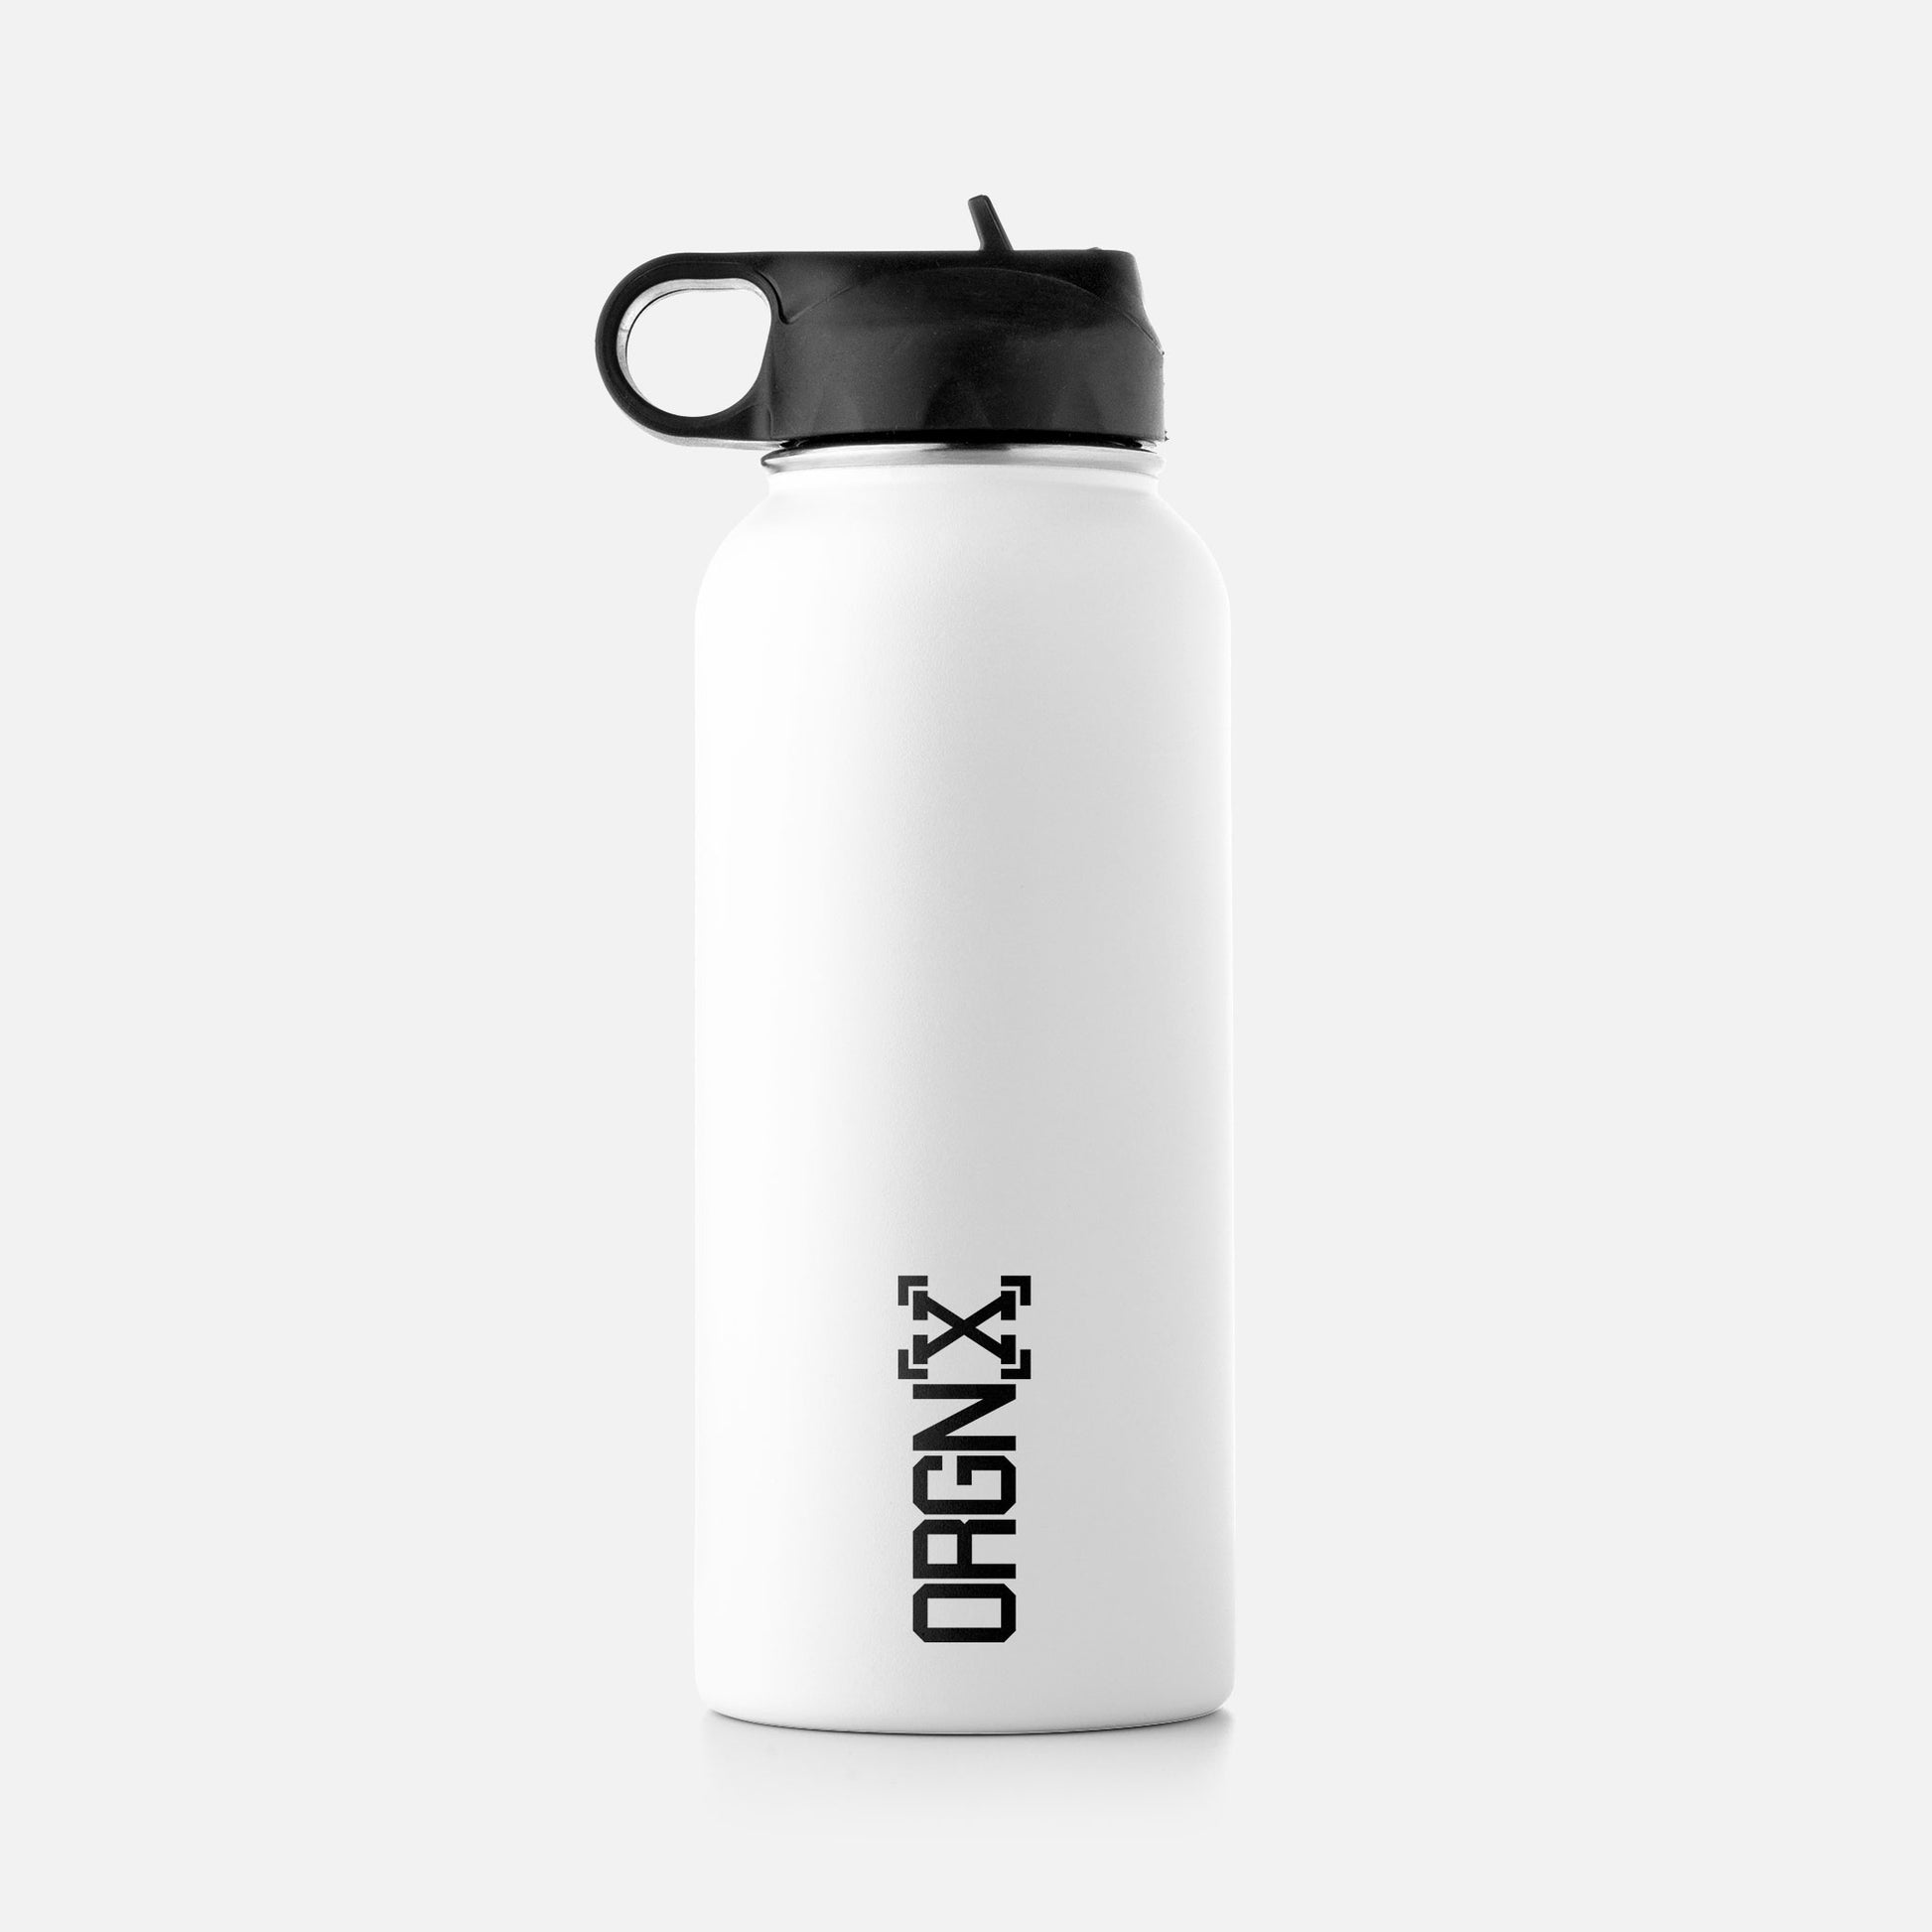 ORGNX Insulated Water Bottle White